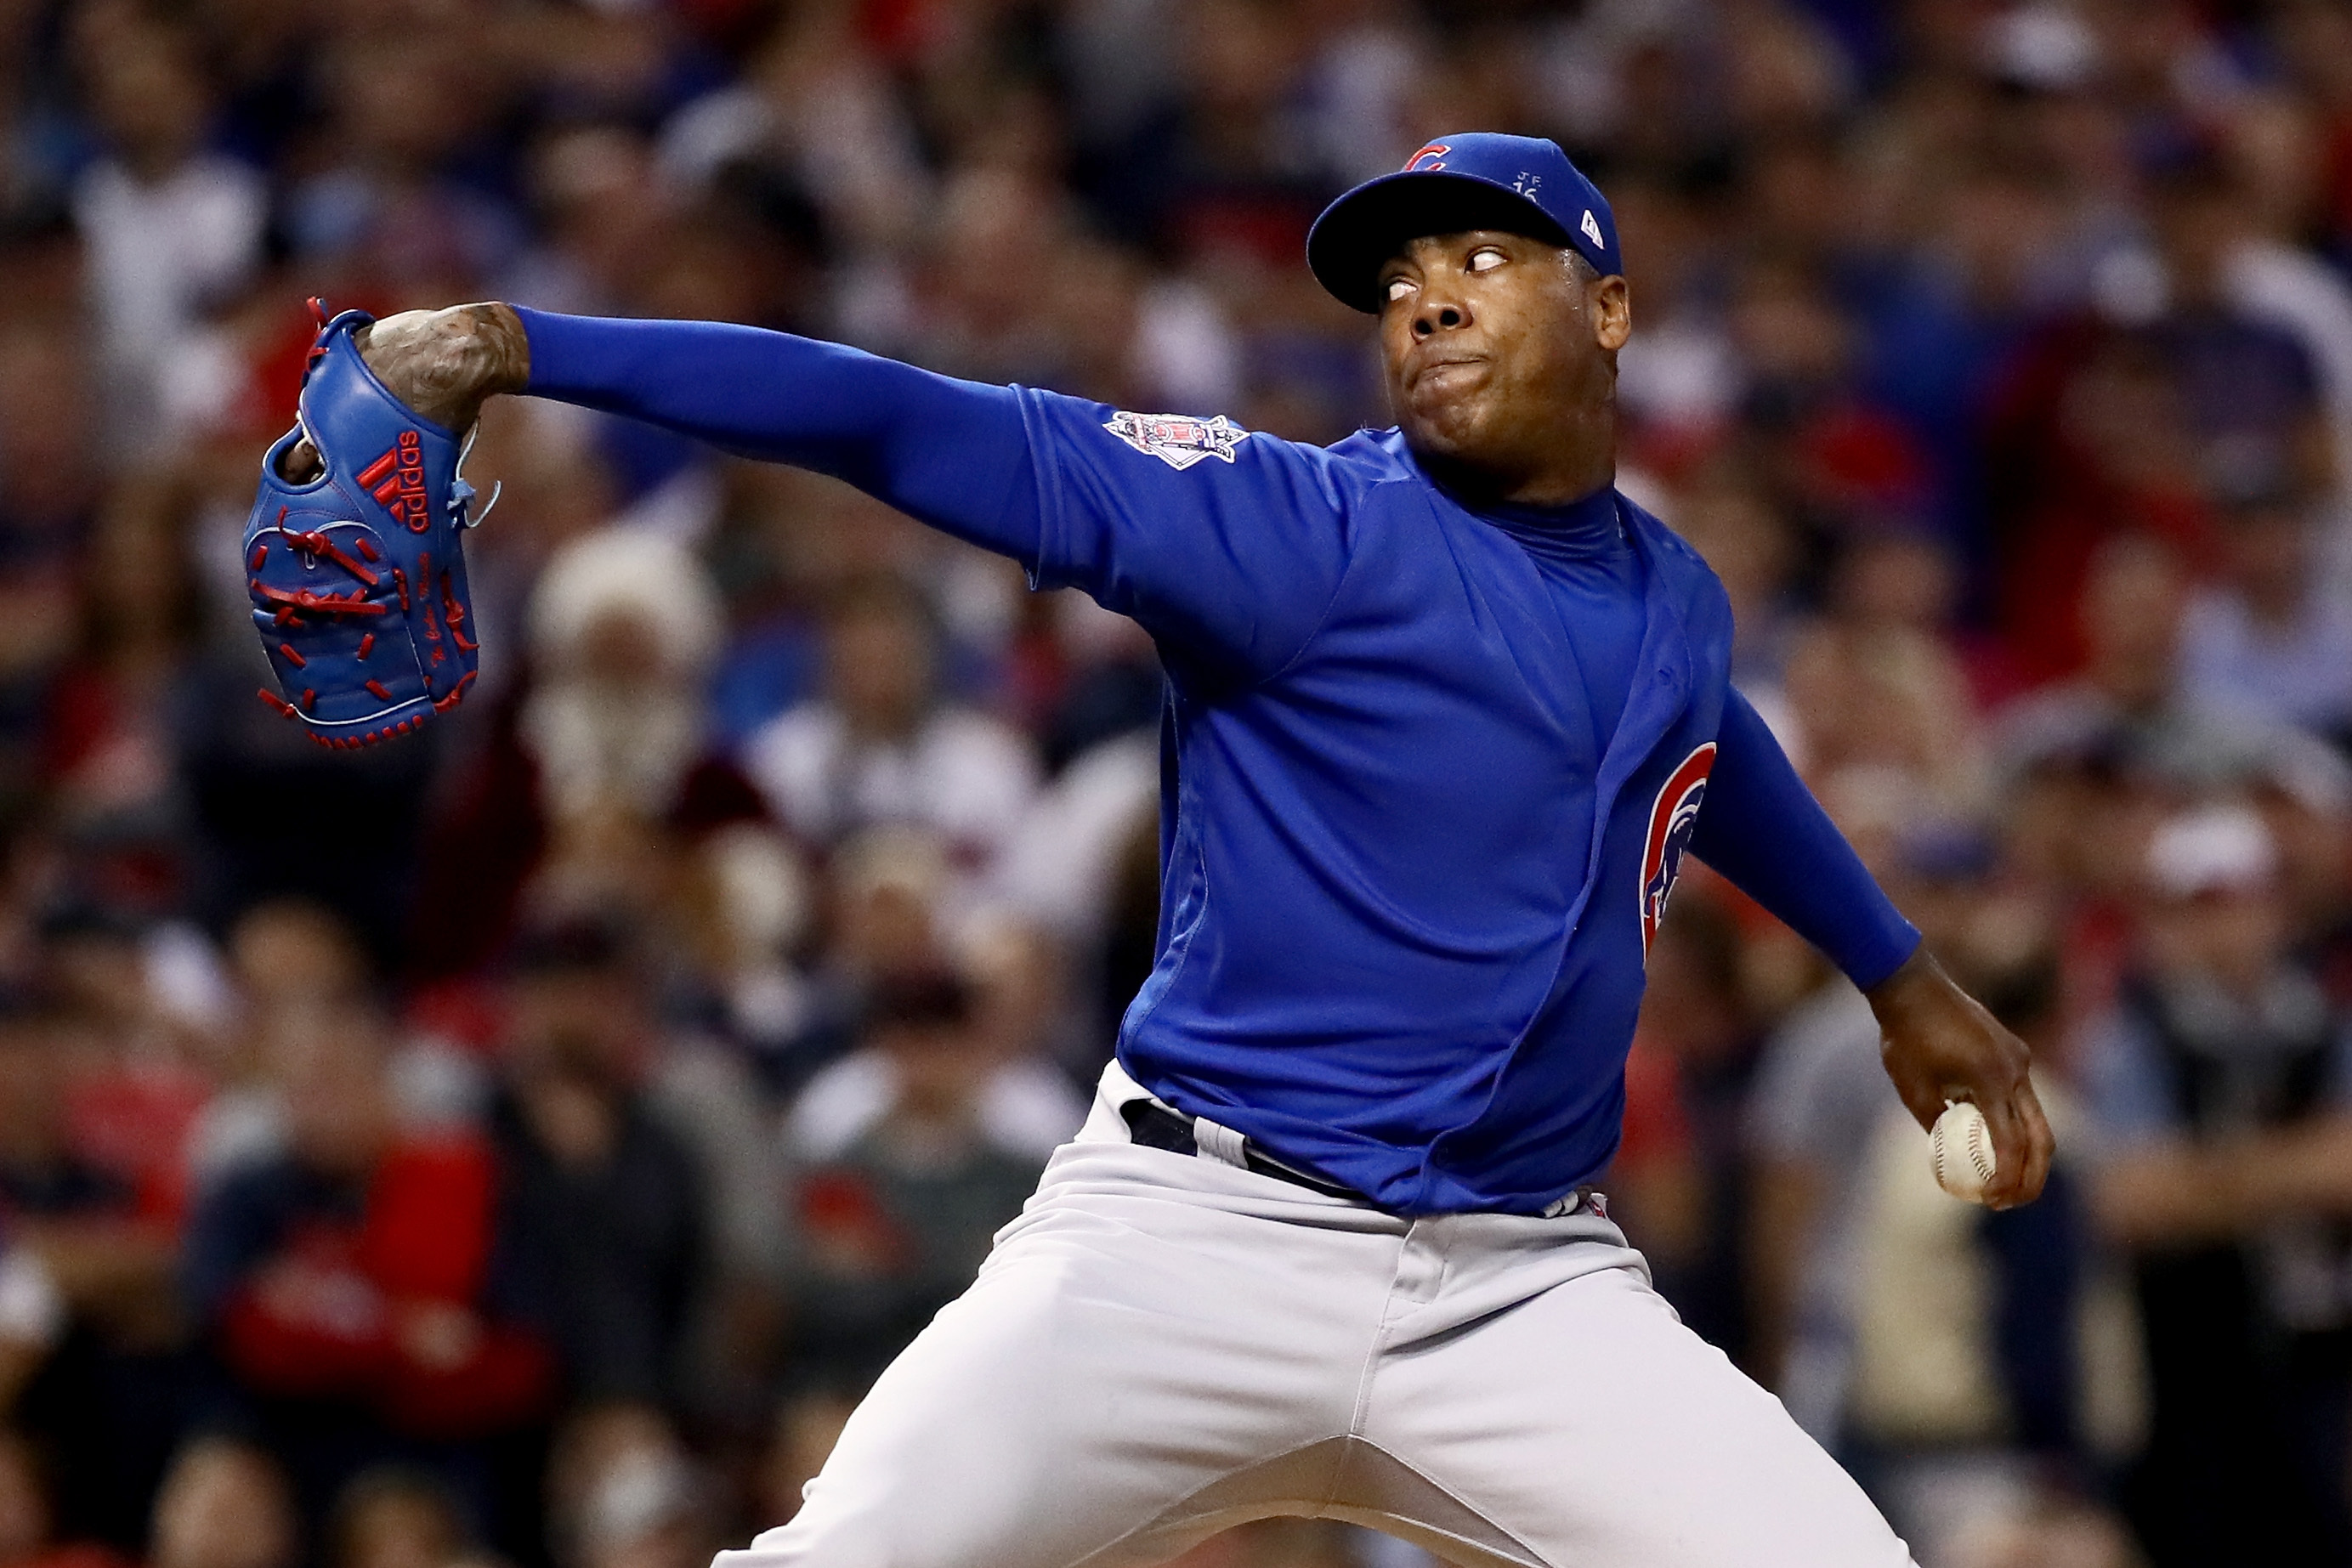 Aroldis Chapman is determined to help bring the Yankees back to